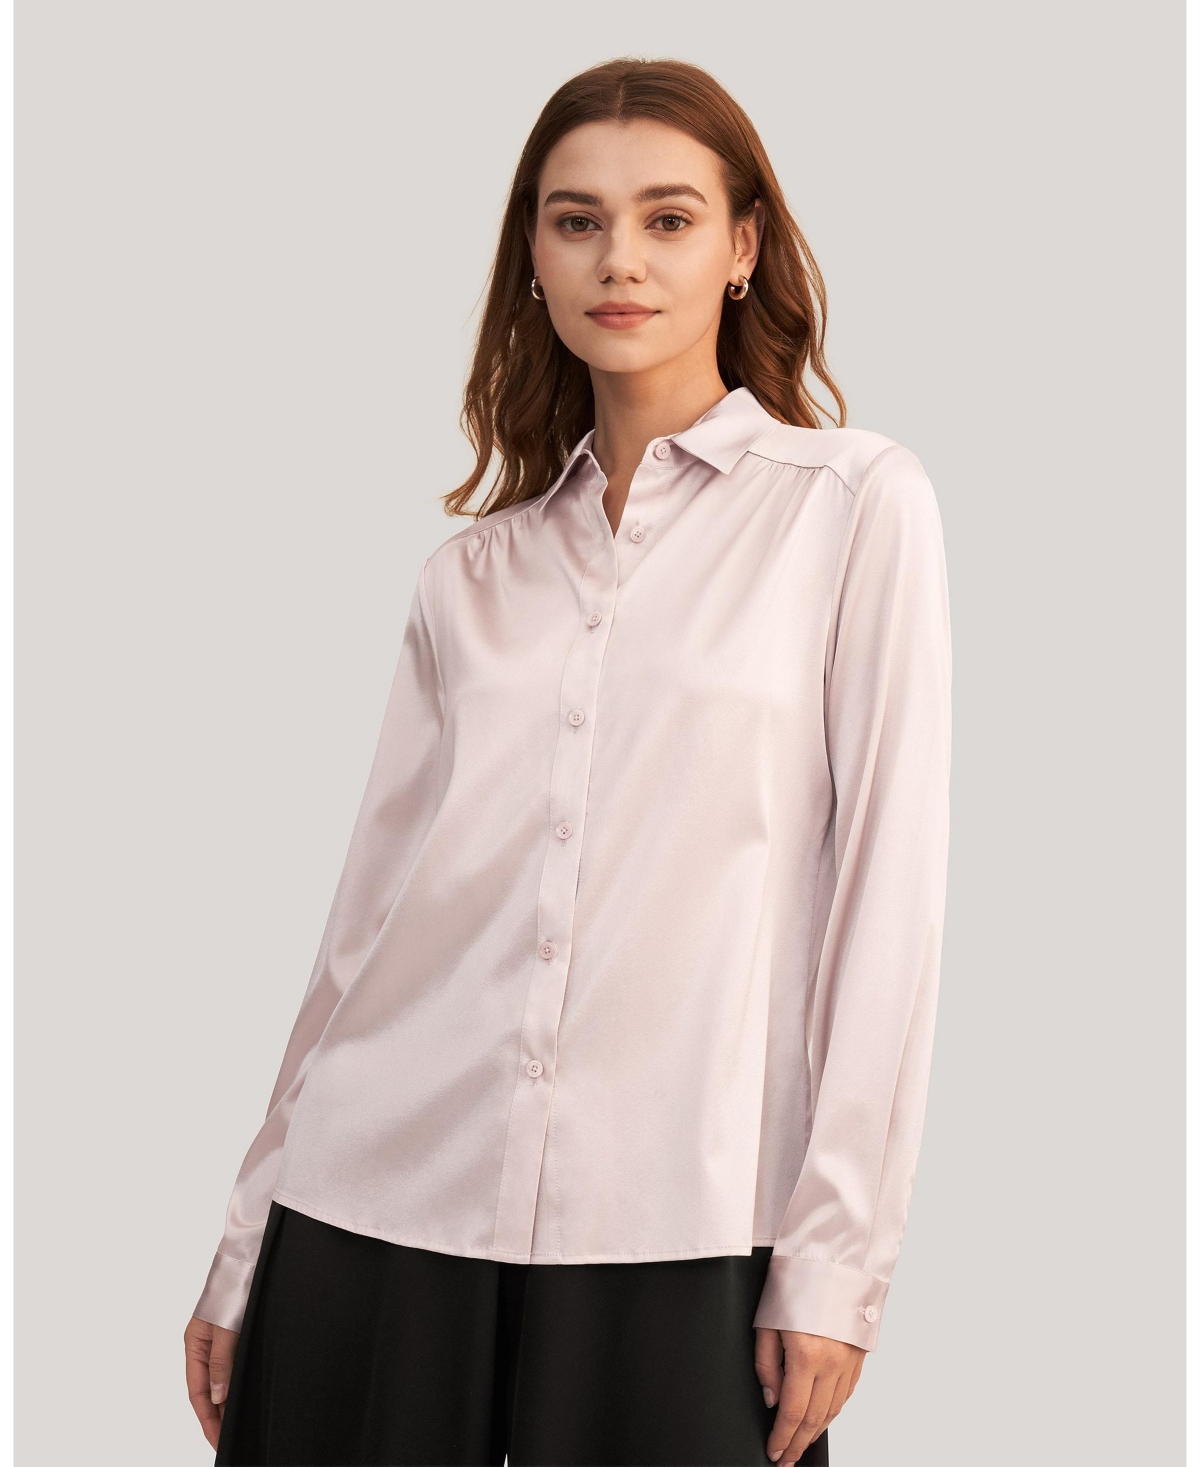 Women's Long Sleeves Collared Silk Blouse - Silver